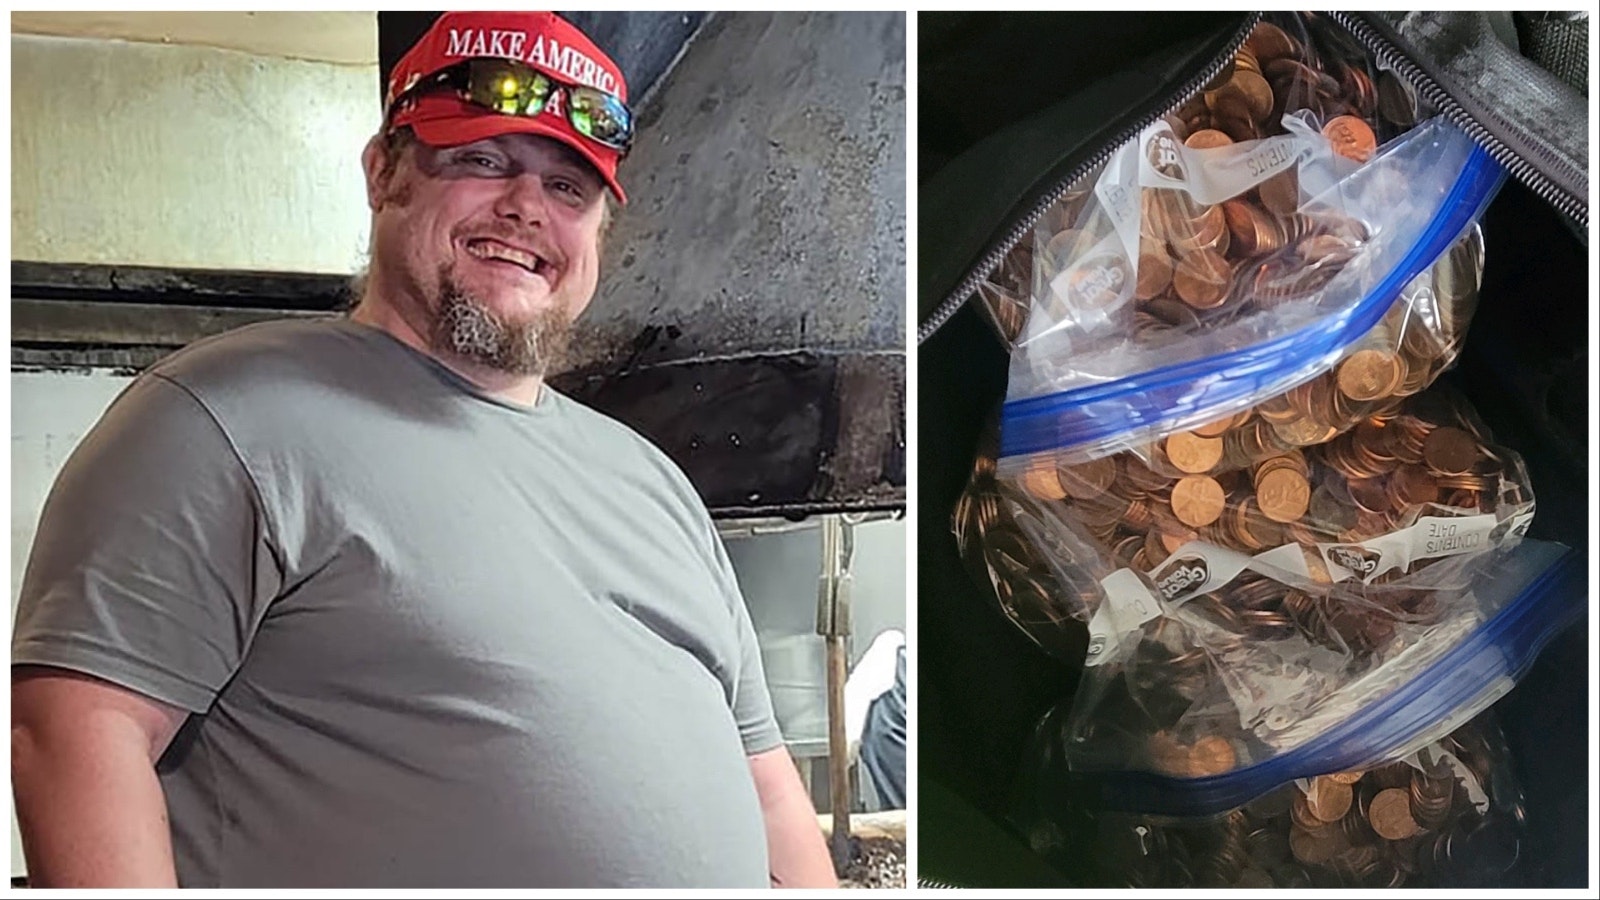 Saratoga resident Jimmy Dempsy was turned away when he tried to pay for his $155 public records request at town hall in pennies, 15,500 of them.